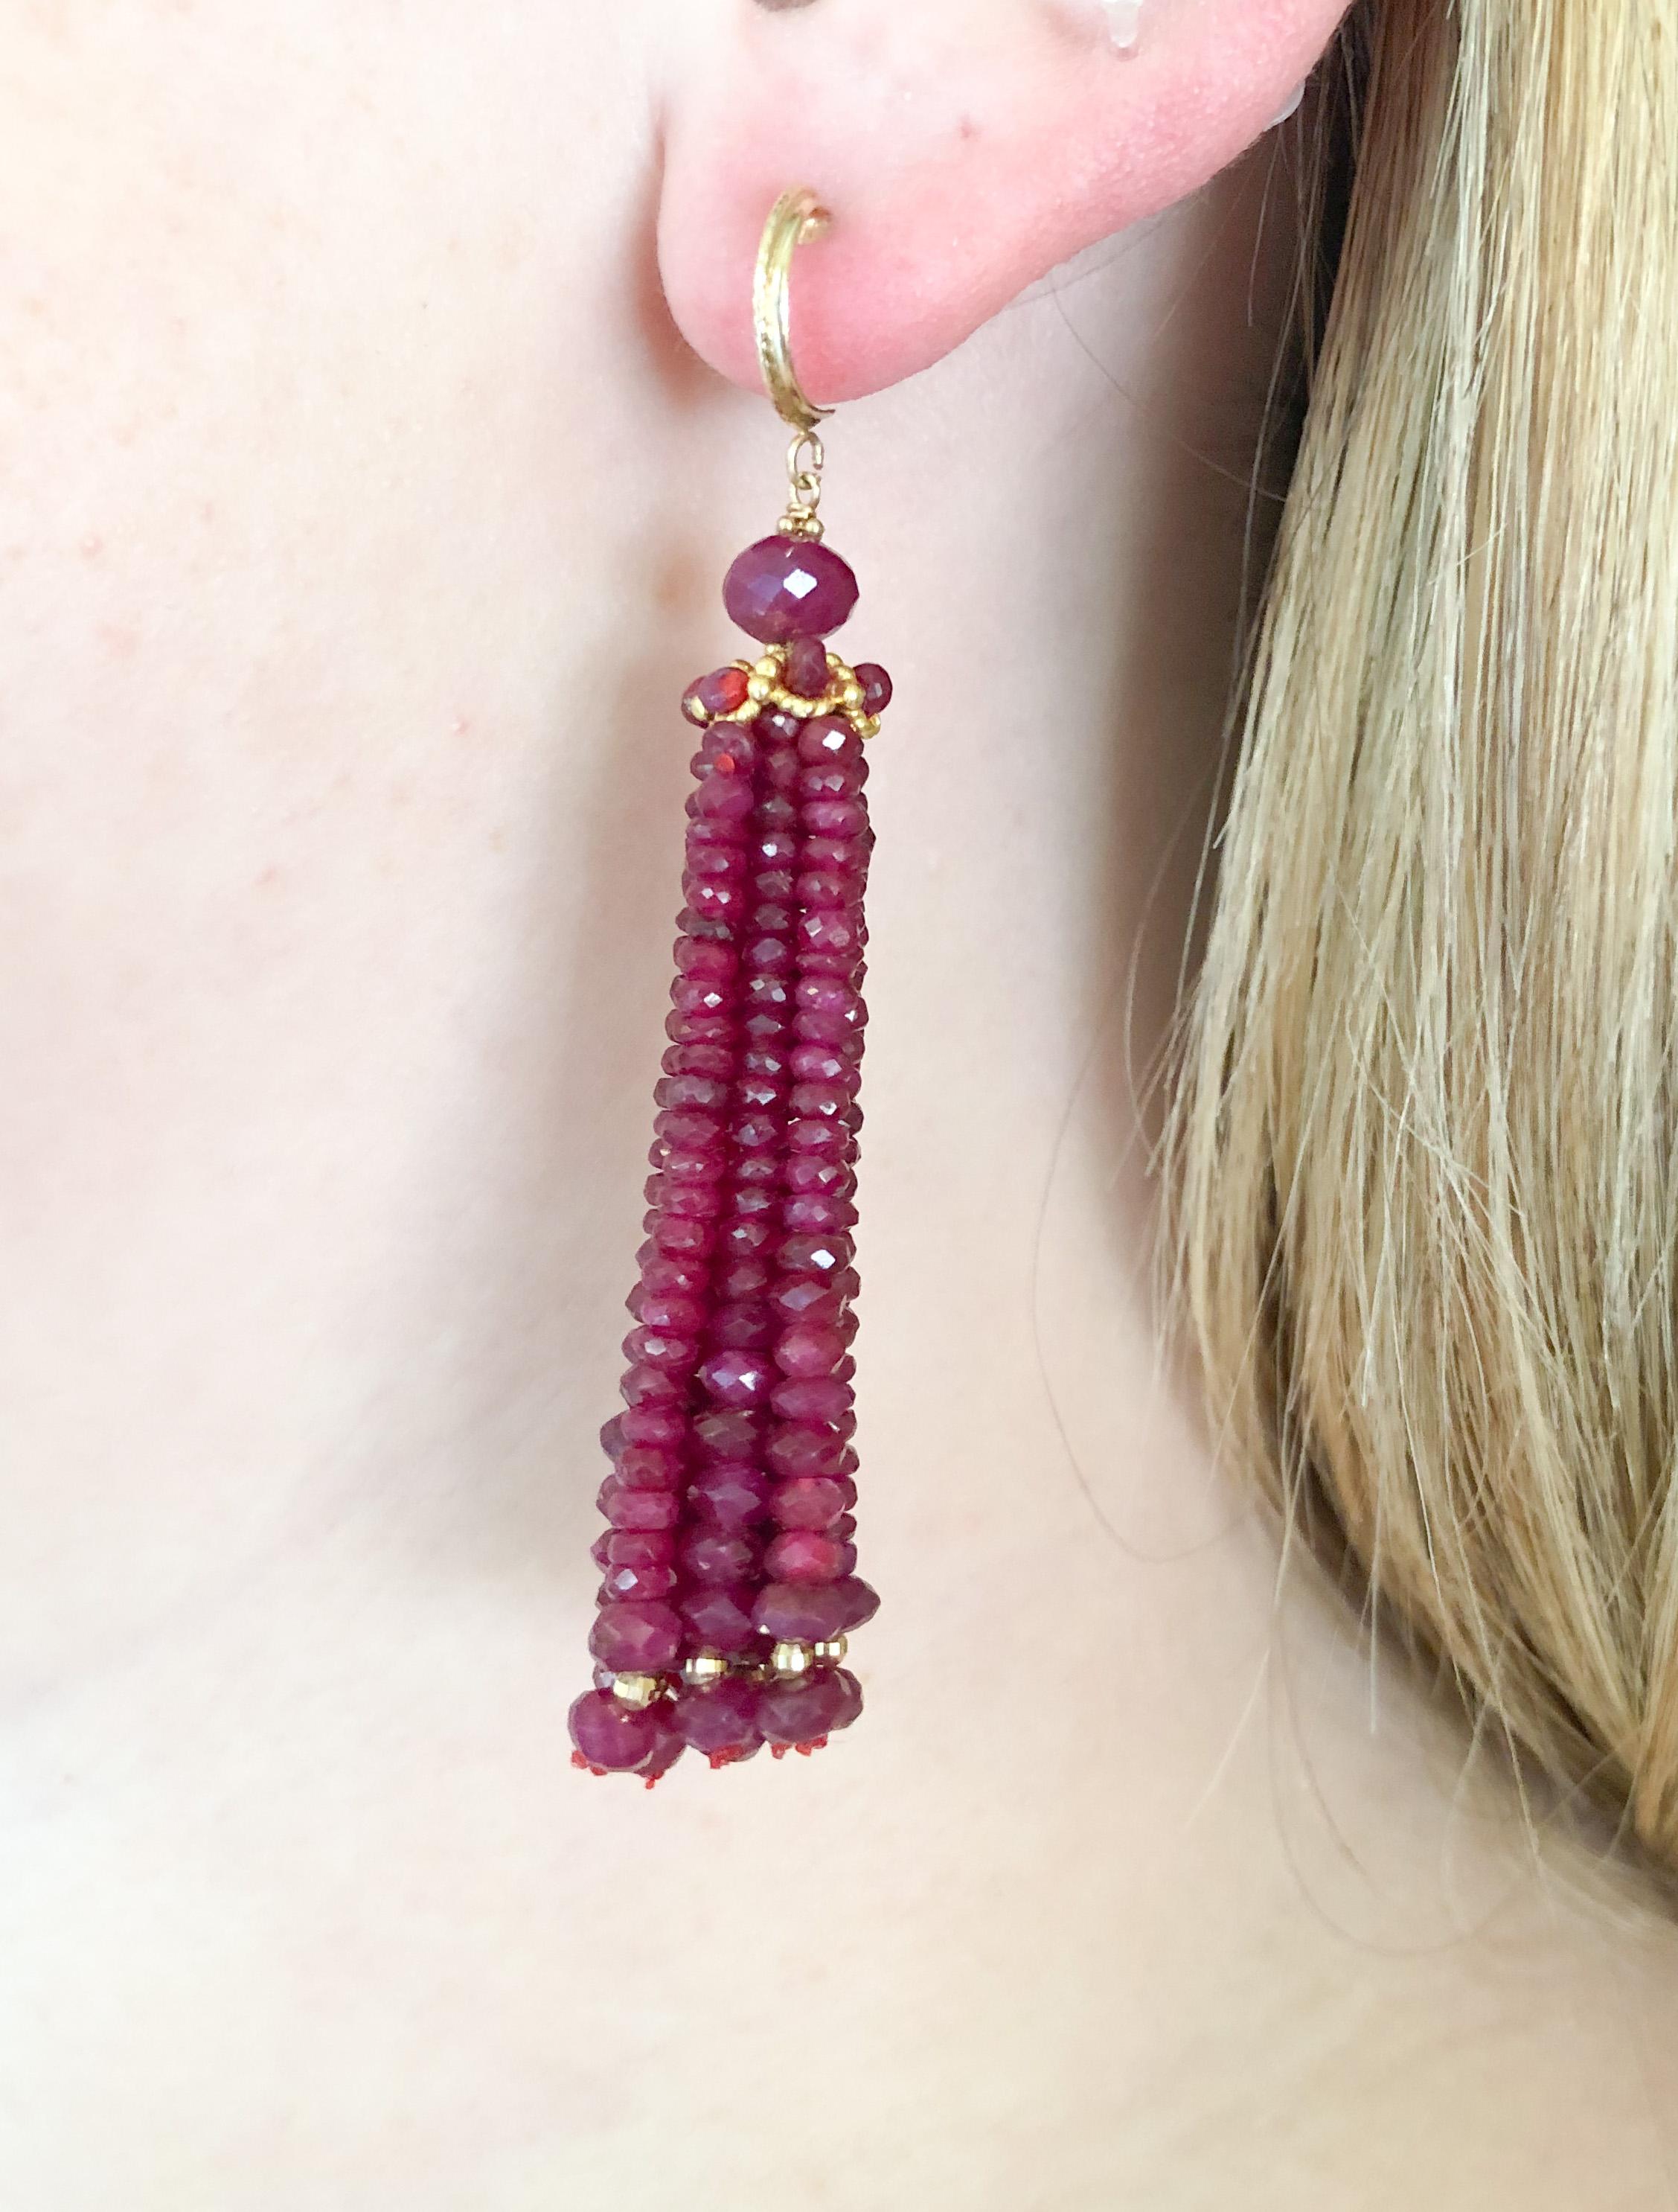 Marina J. Elegant Tassel Earrings with Sparkling Ruby Beads and 14k Yellow Gold  5